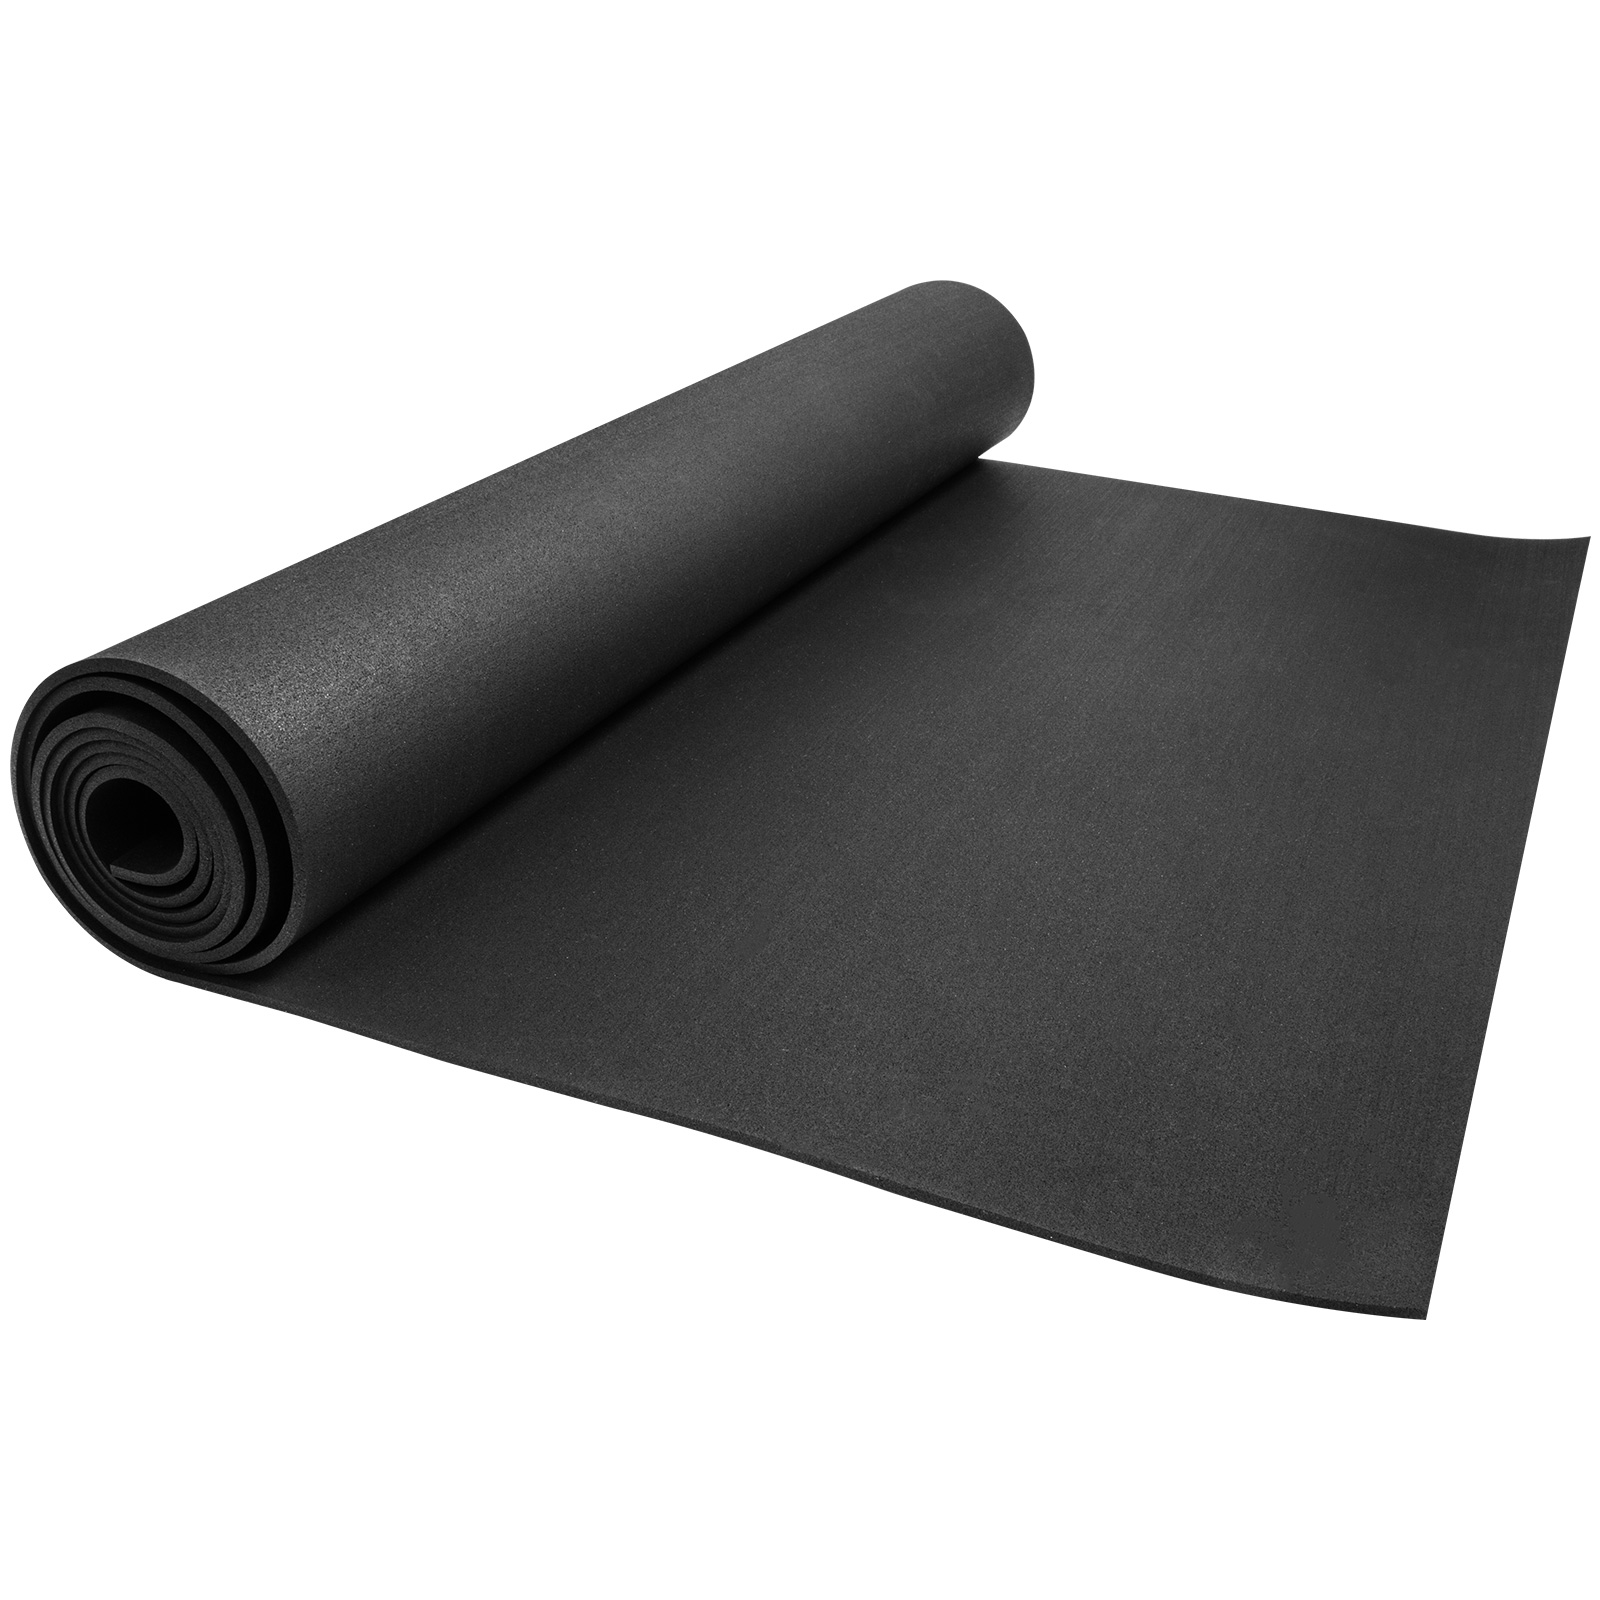 Exercise Floor Gym Mats